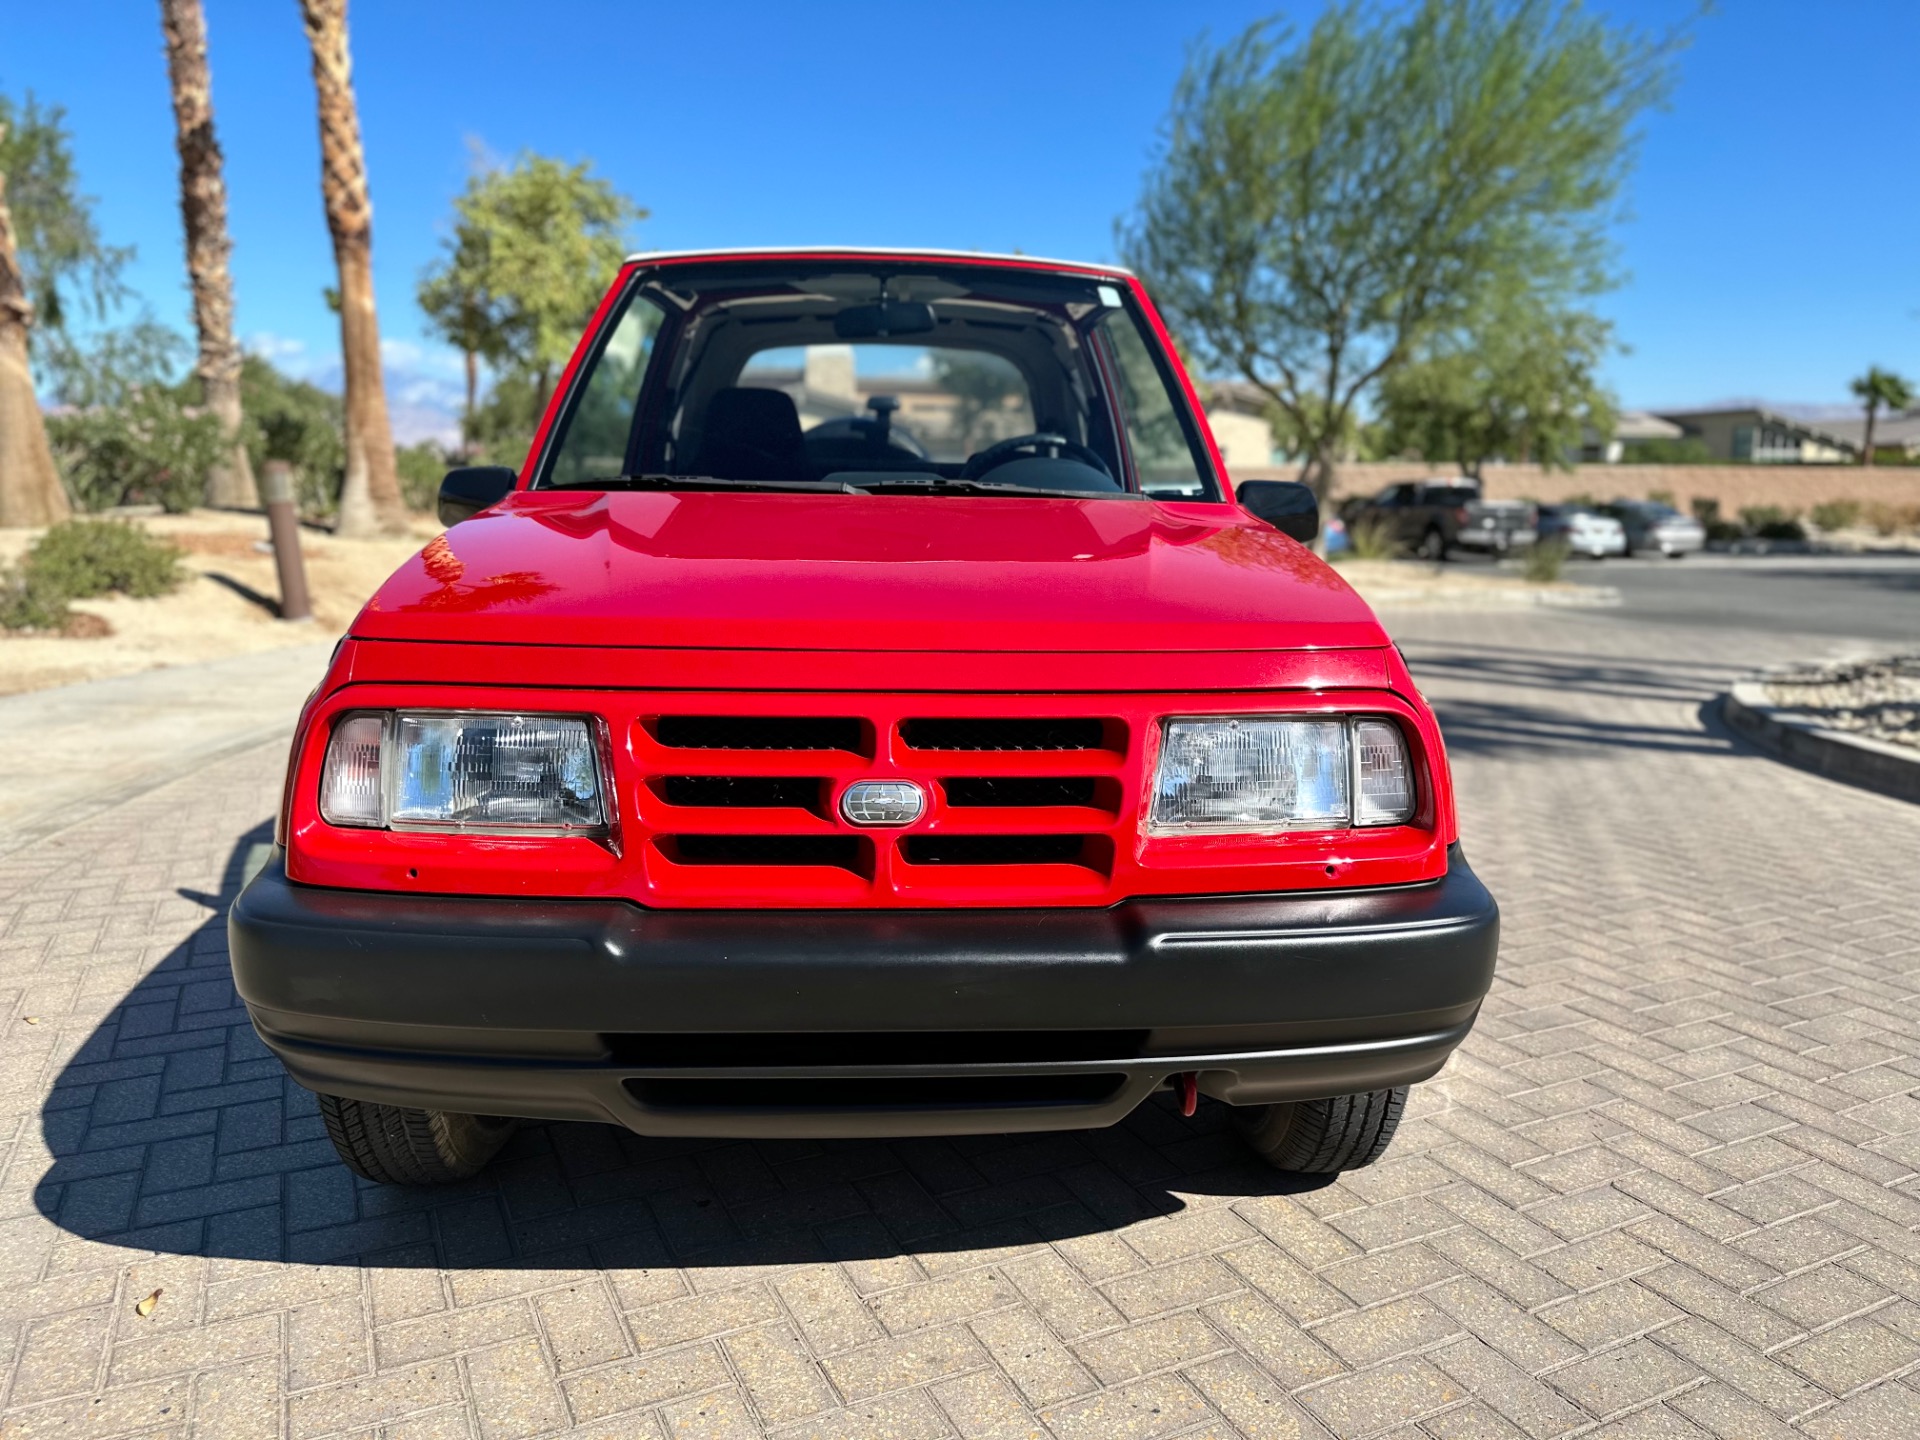 Used Geo Tracker for Sale Near Me